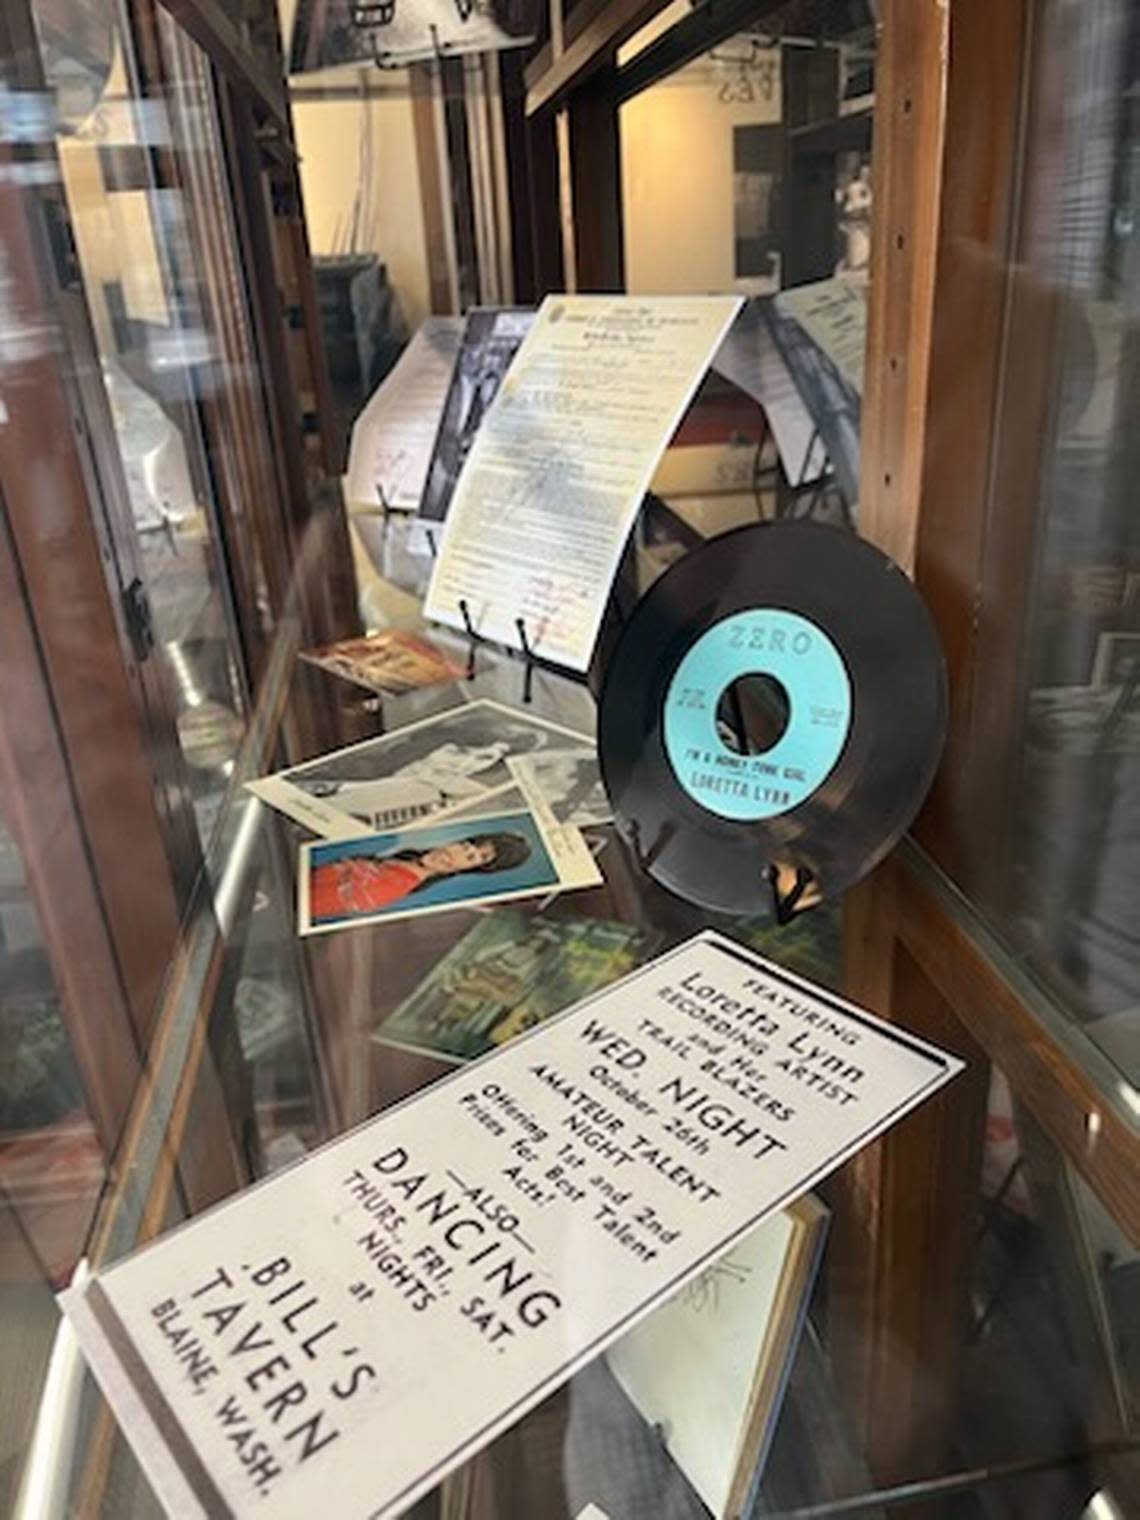 A replica of an advertisement for a Loretta Lynn concert at Bill’s Tavern in Blaine, Wash. is on display at the Lynden Heritage Museum. Daniel Schrager